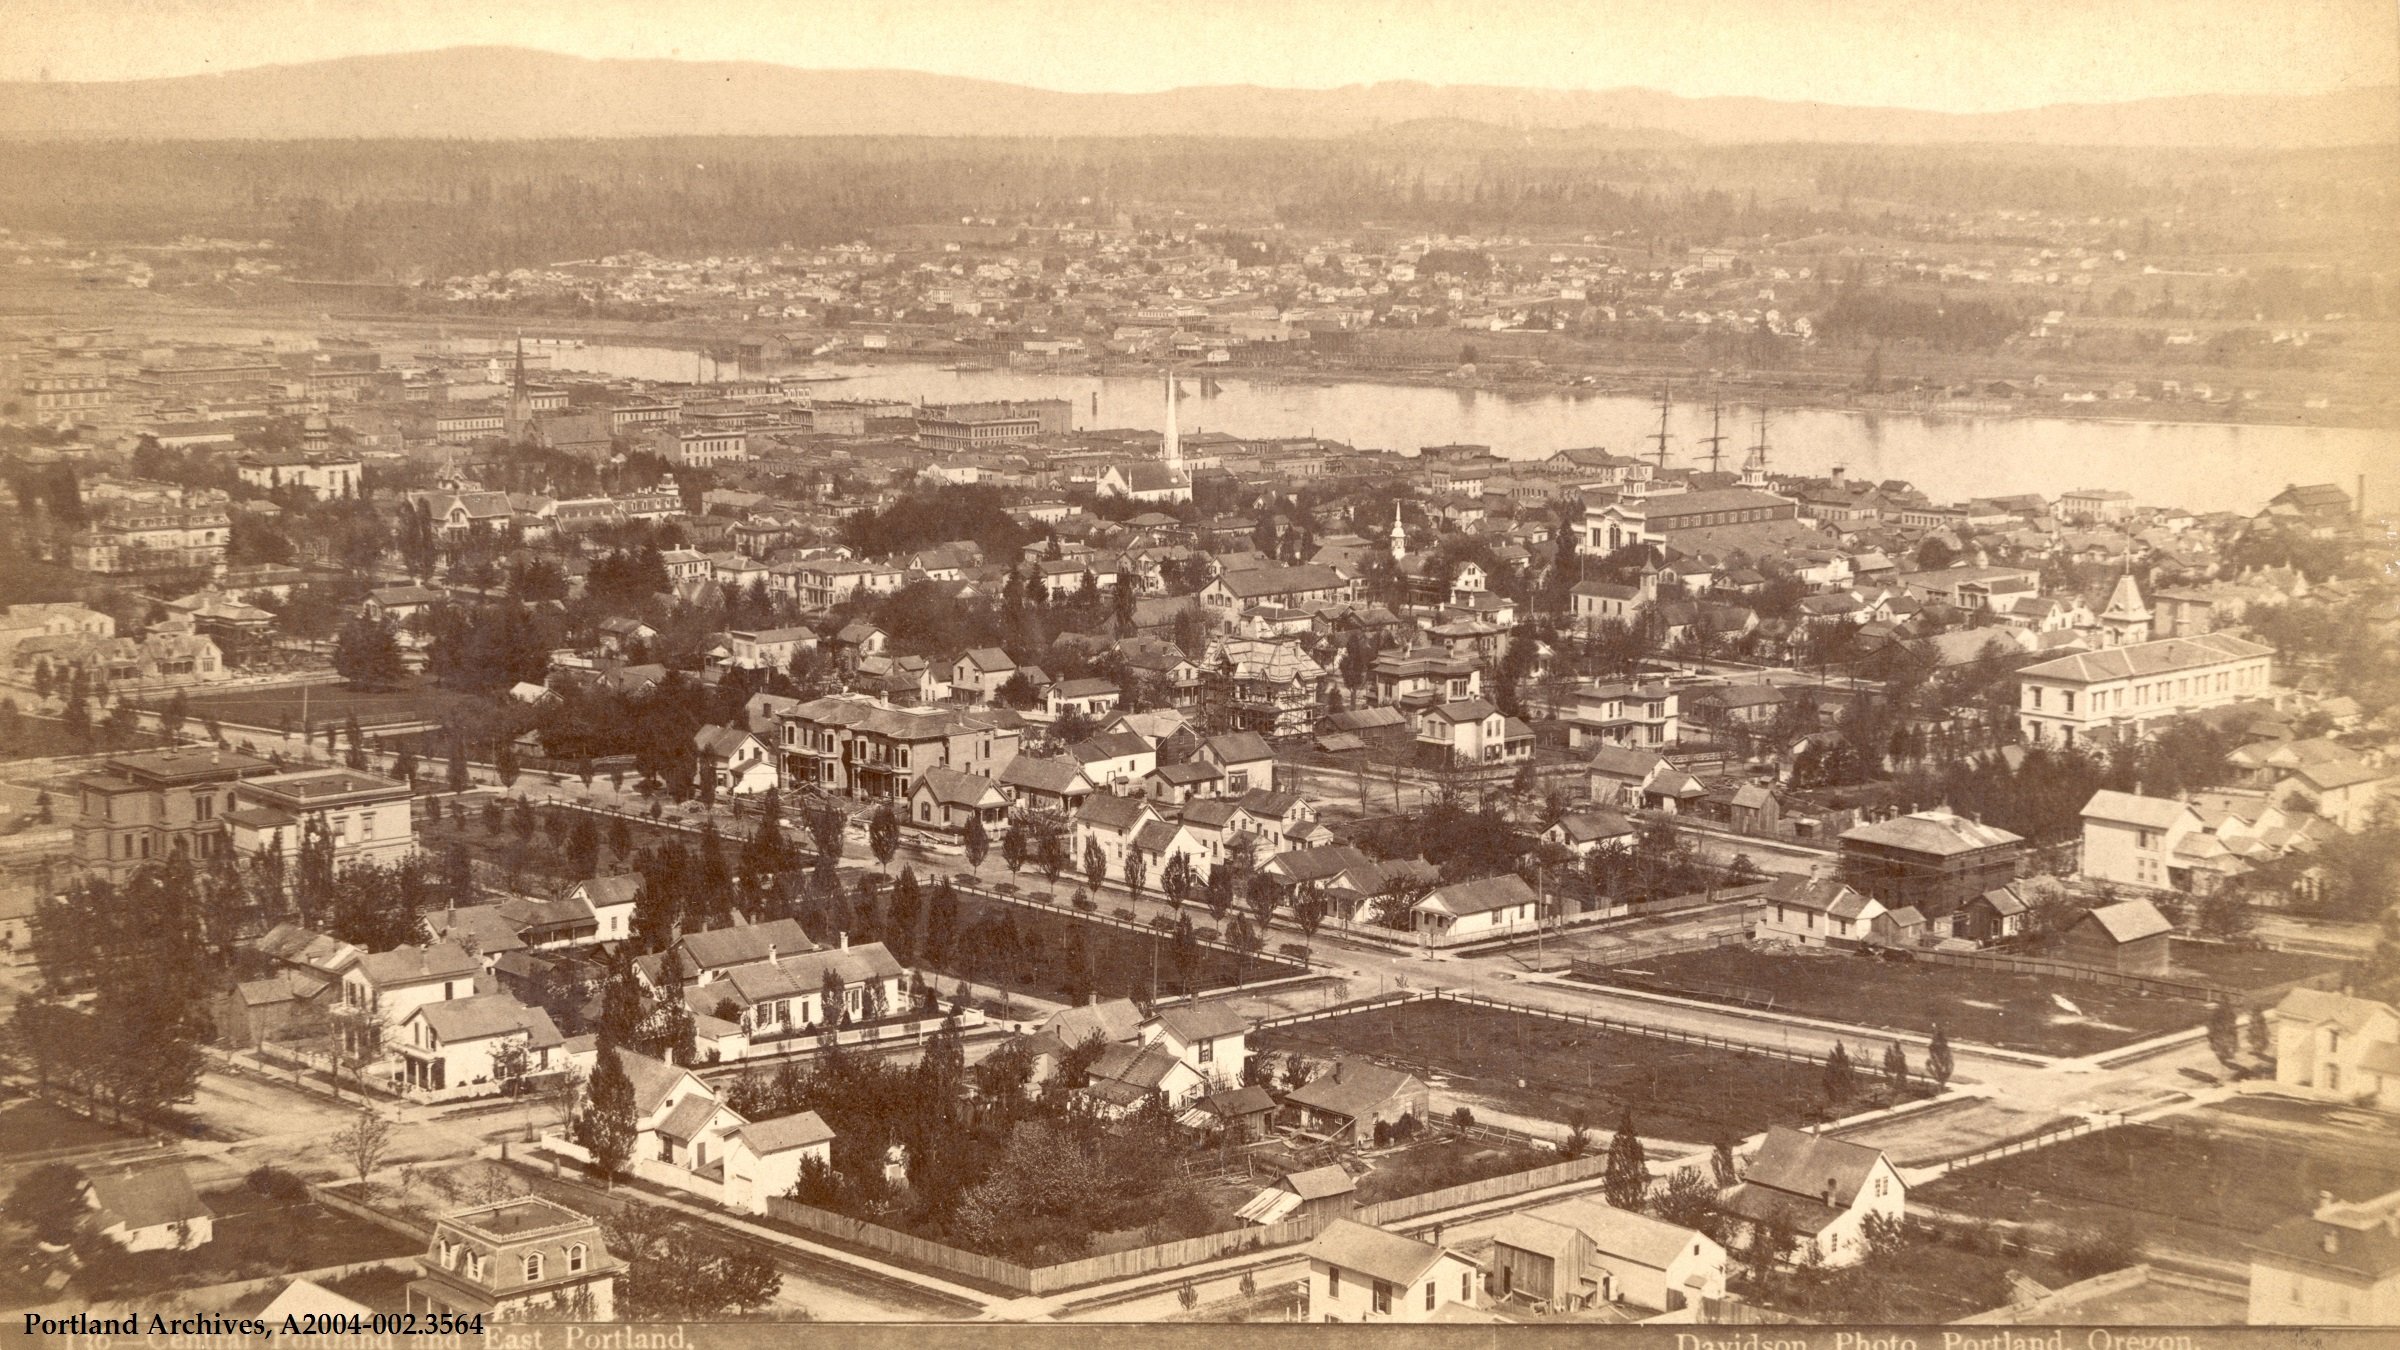 City Auditor - Archives _ Records Management - Auditor s Historical Records - A2004-002.3564   1883 View of central Portland and east Portland - Davidson 136.JPG